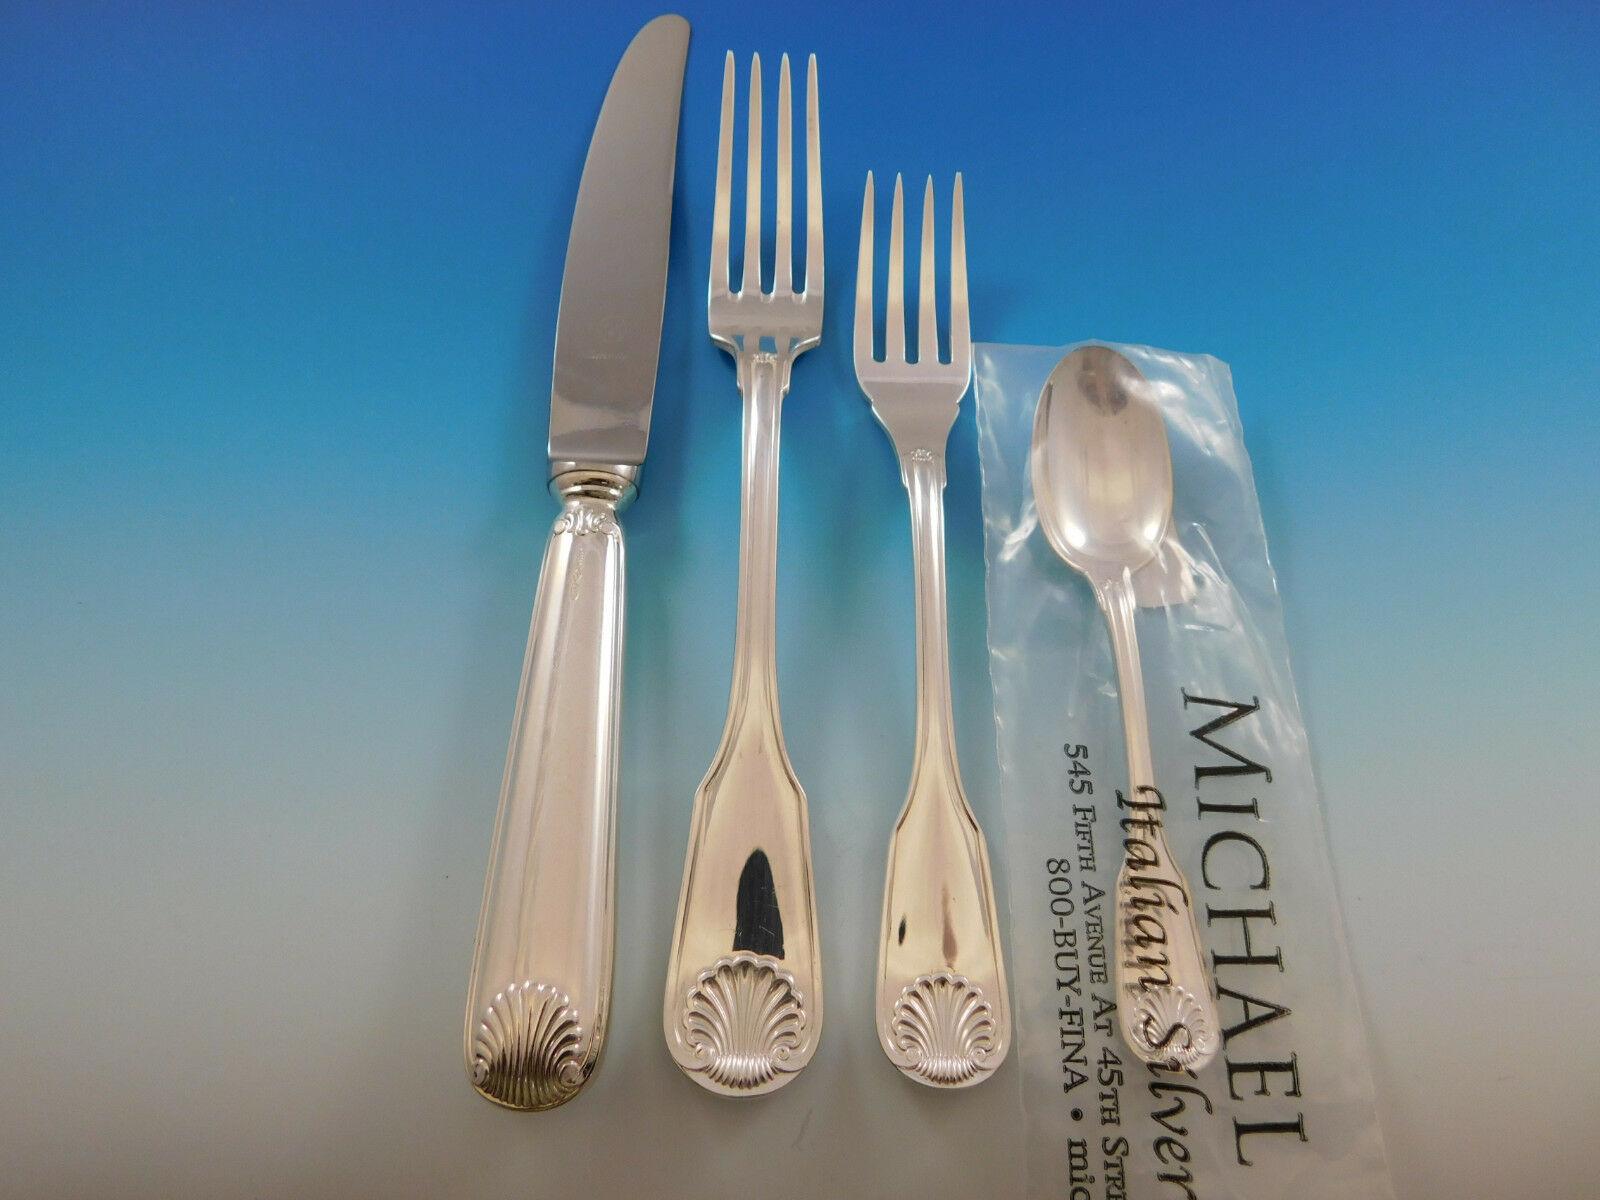 This gorgeous shell motif Italian collection flatware is large and heavy European size, meticulously crafted in Italy of the finest silver.

Conchiglia AKA shell by Zarmella Argenti, retailed by Michael C Fina, Italian sterling silver flatware set -